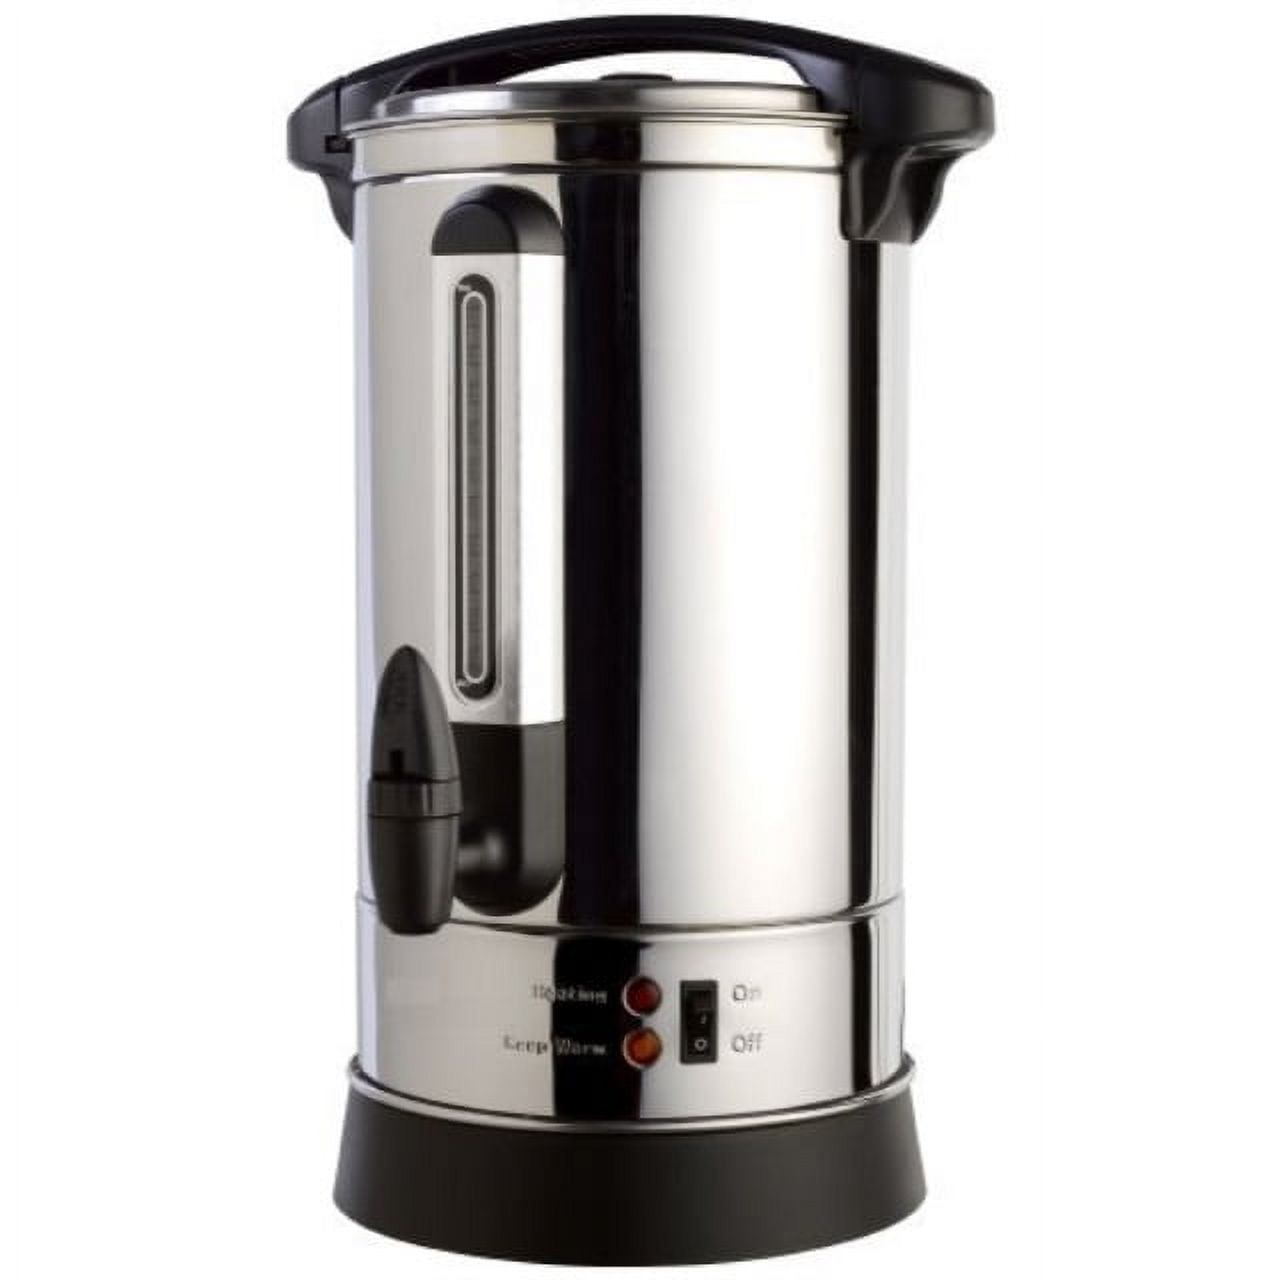  Eurolux Double Insulated Hot Water Urn 40 Cup